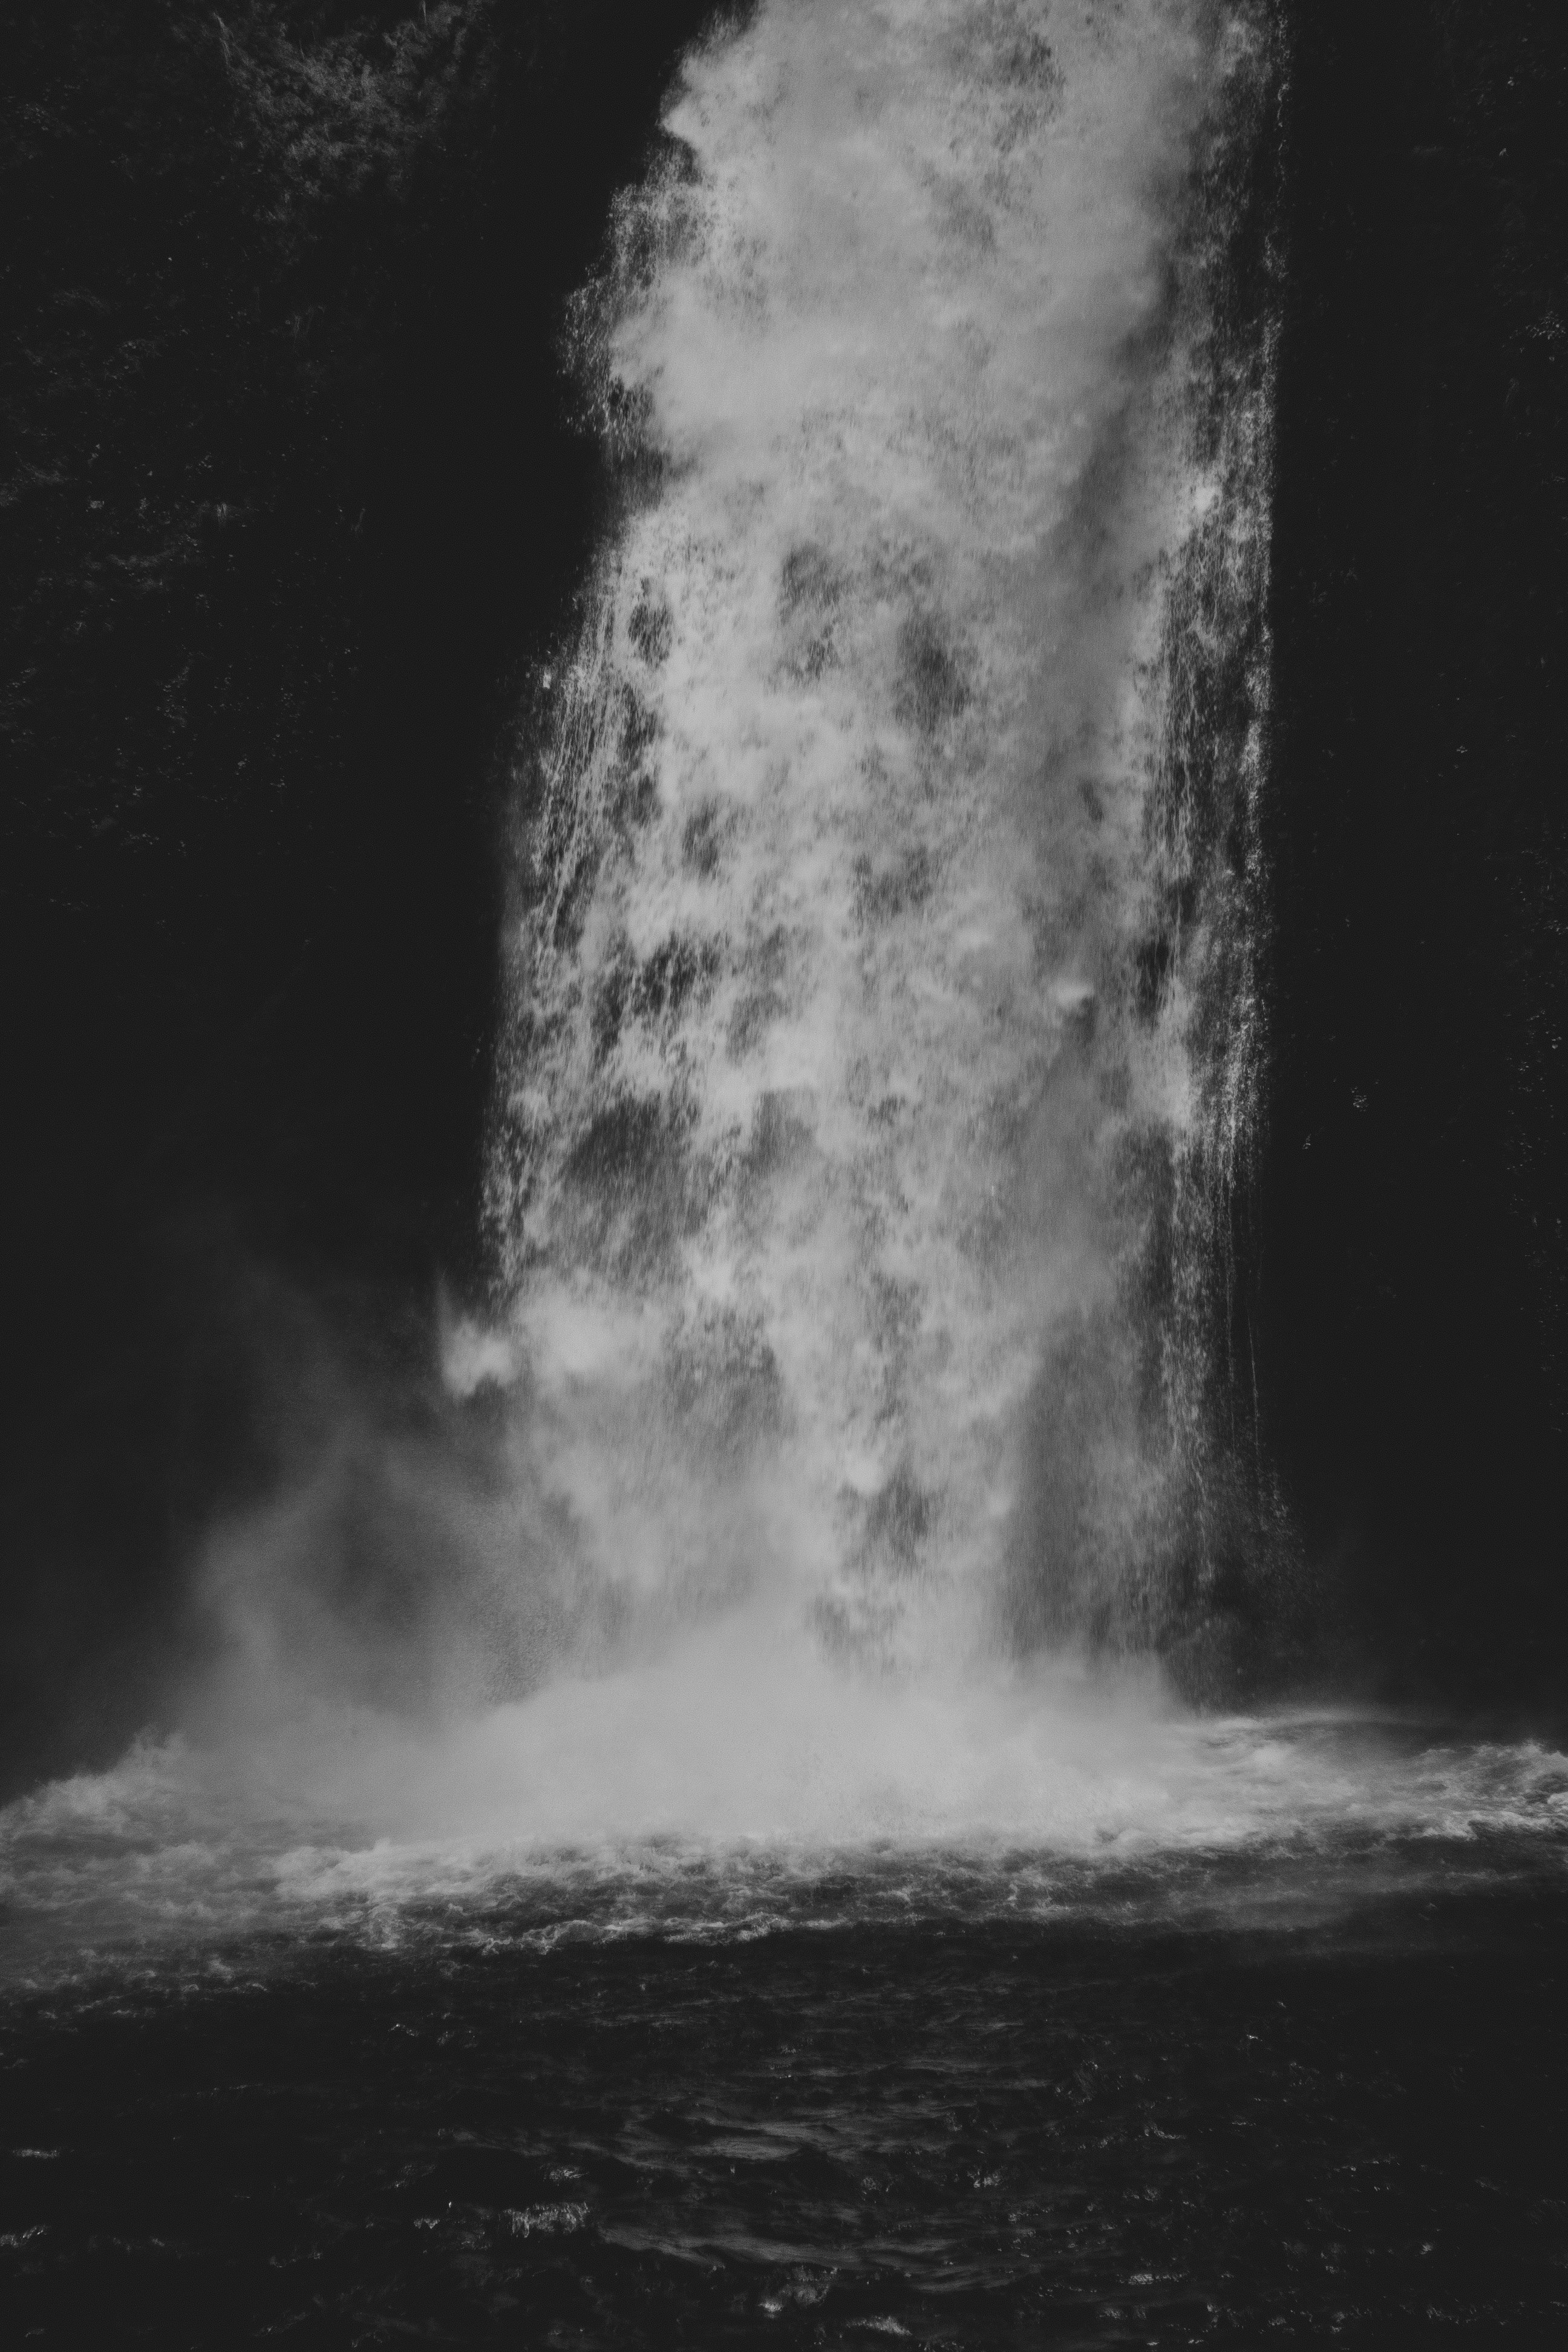 water falls in grayscale photography